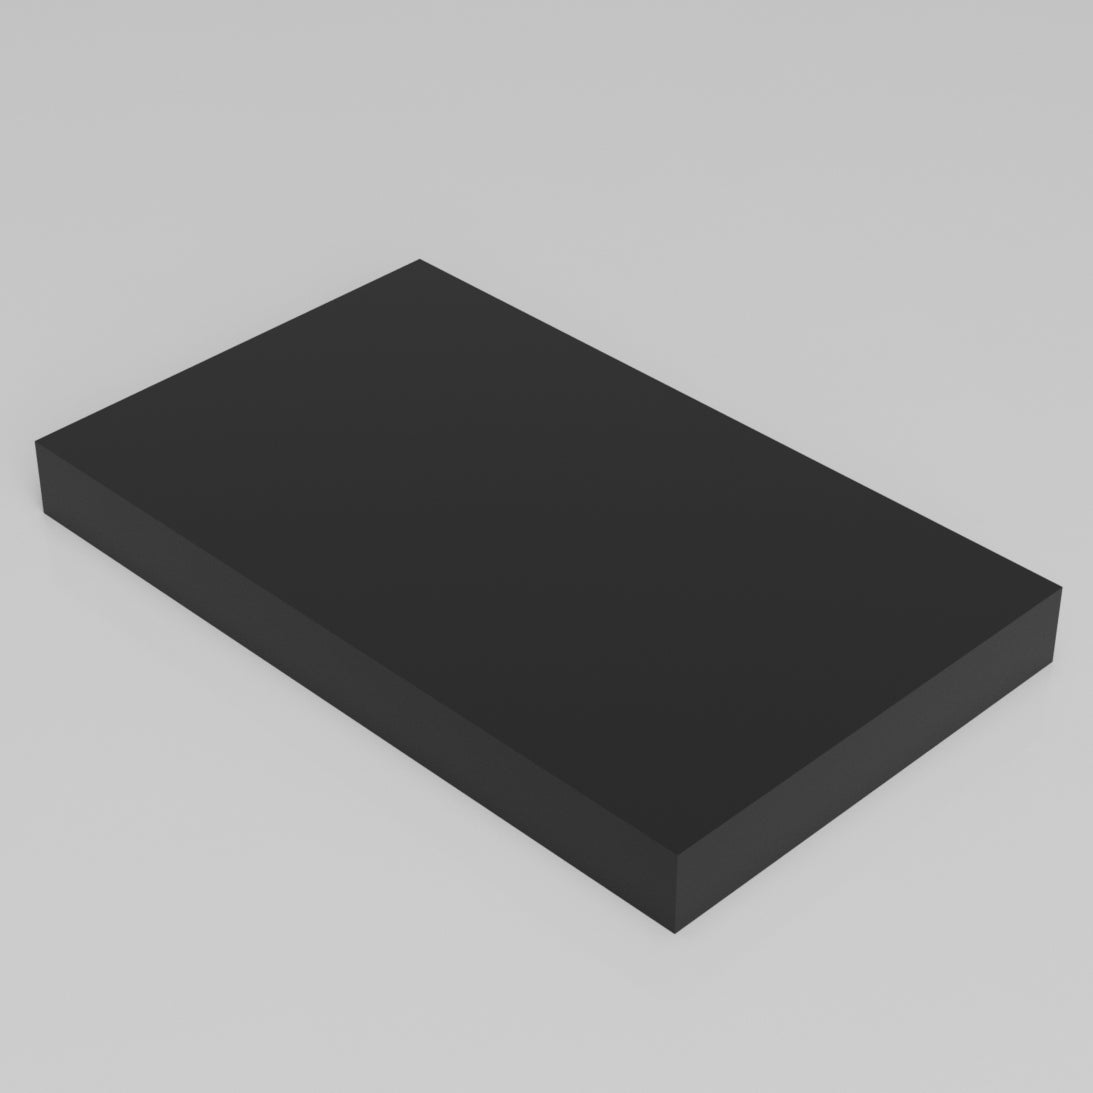 Machinable Wax Rectangular Block Front View 1 Inch by 10 Inch by 6 Inch